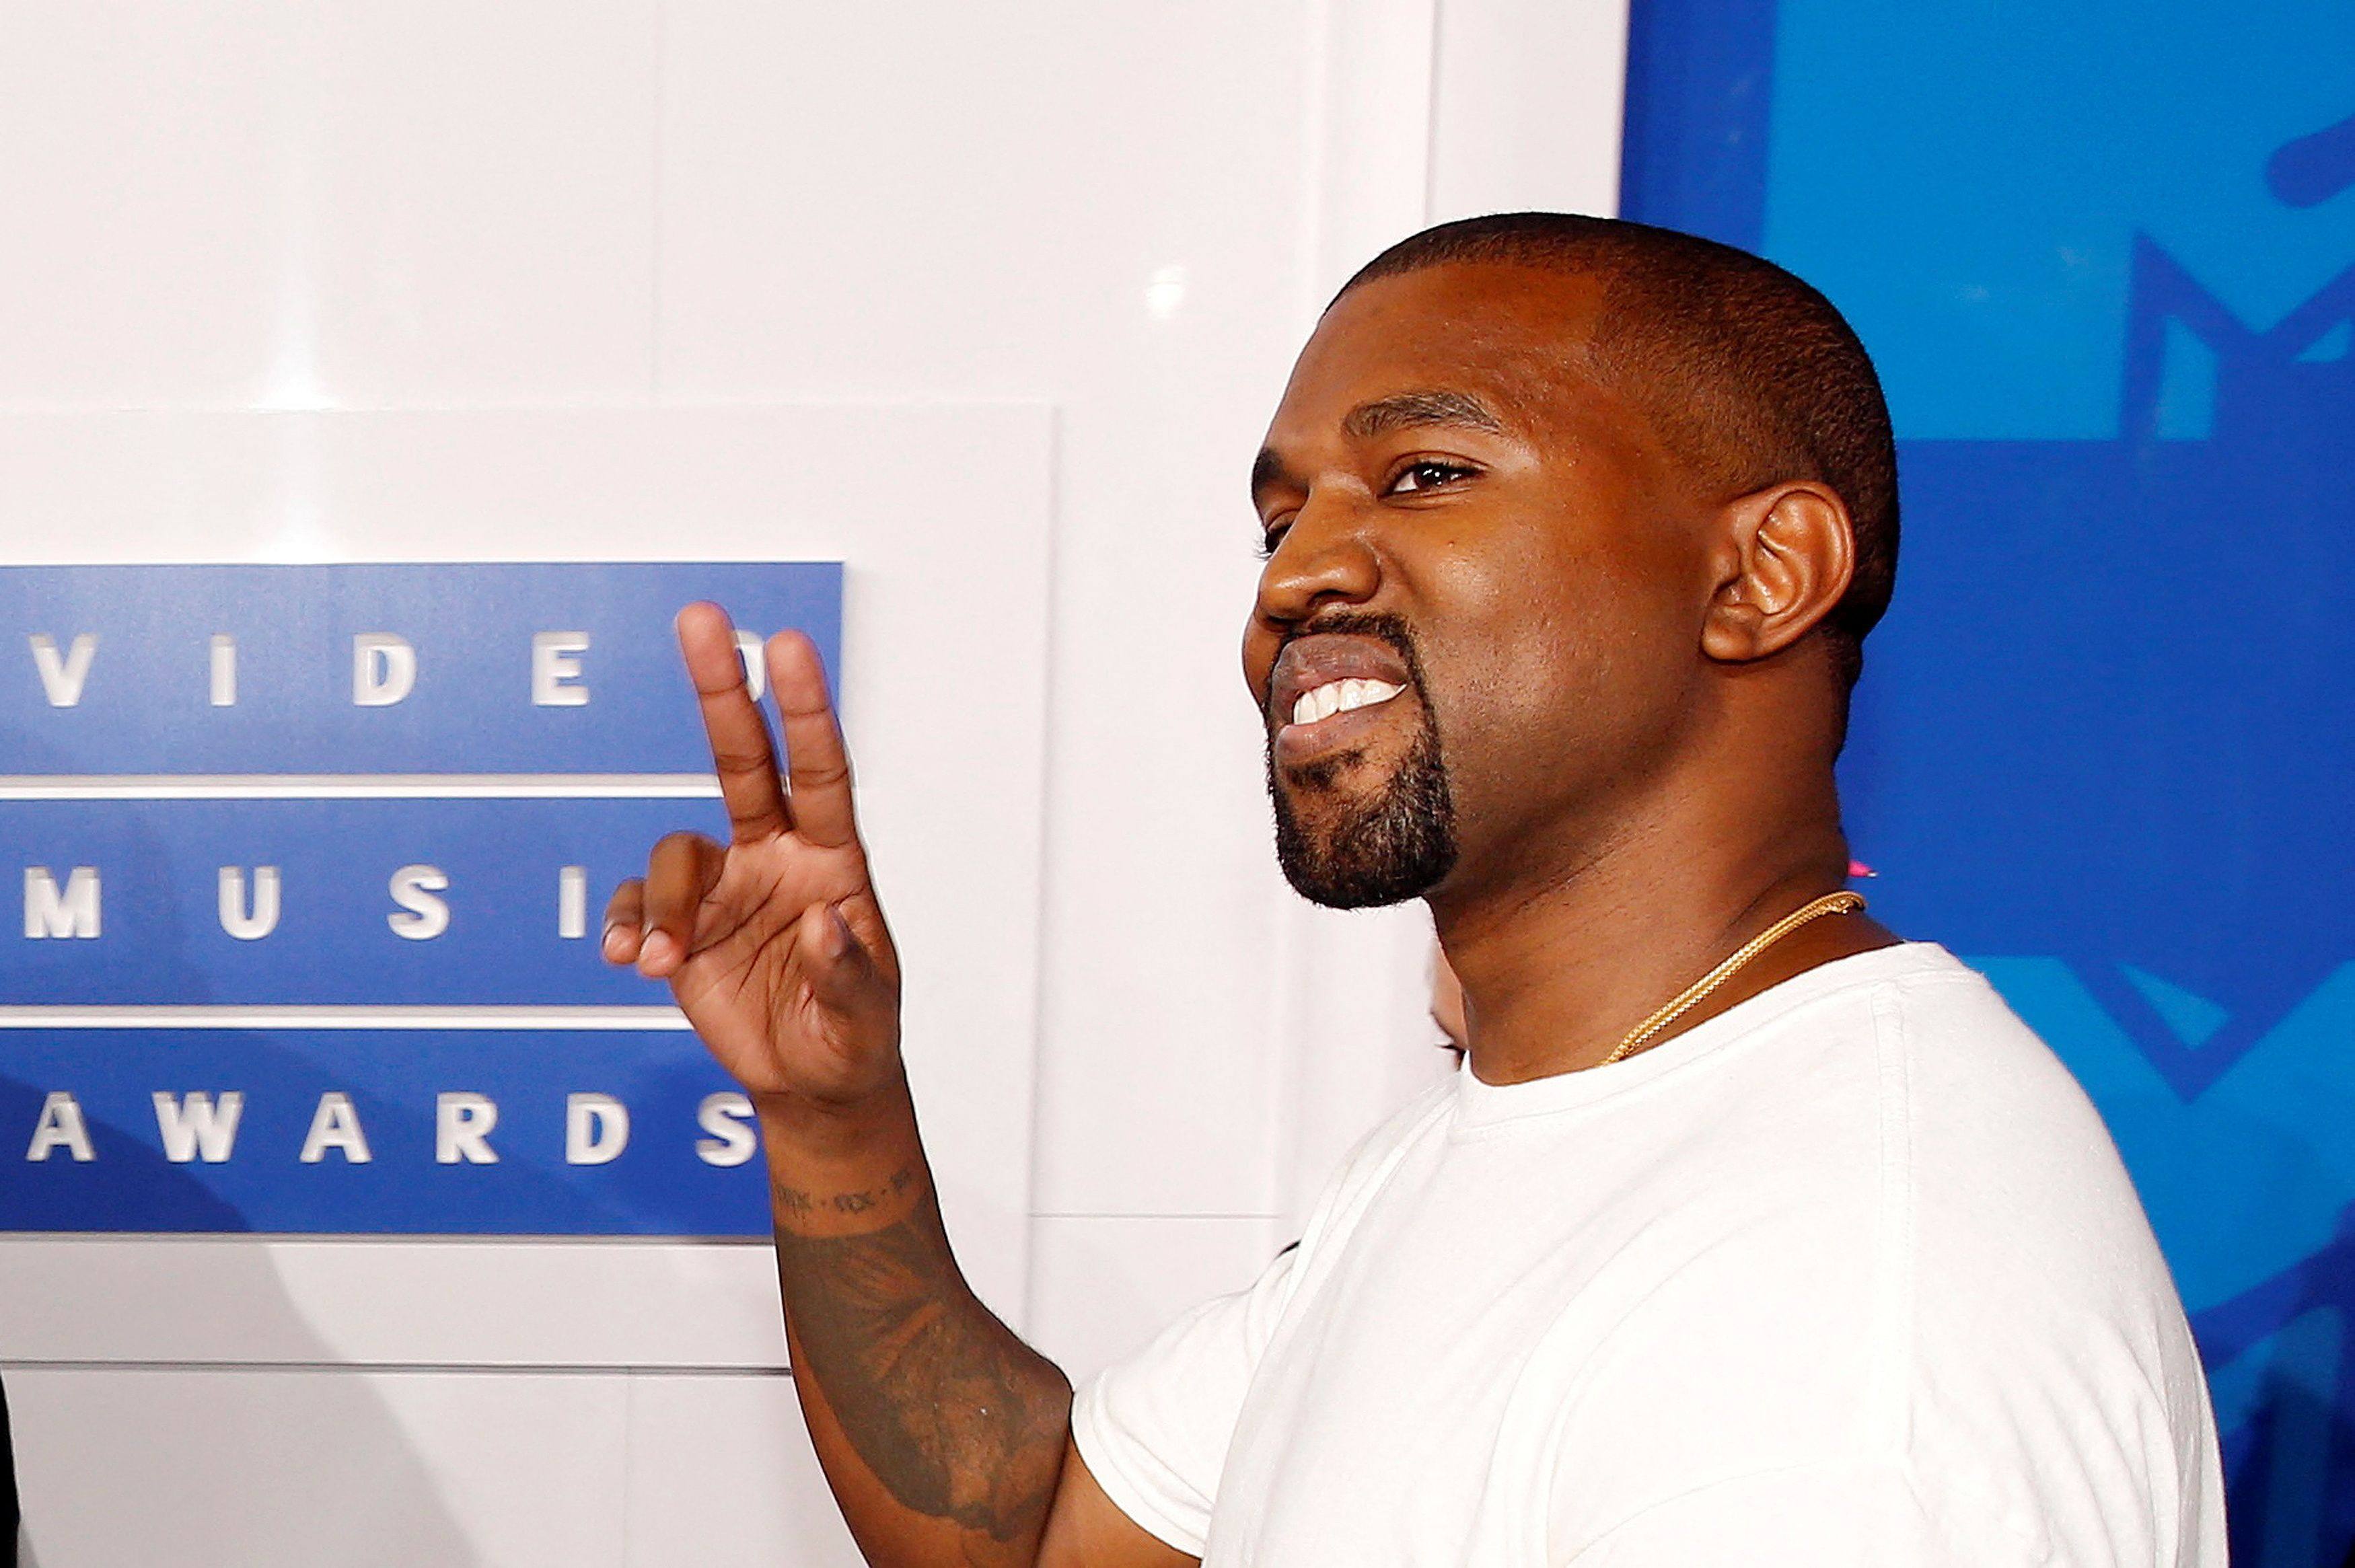 Kanye West at the 2016 MTV Video Music Awards in New York. File photo: Reuters